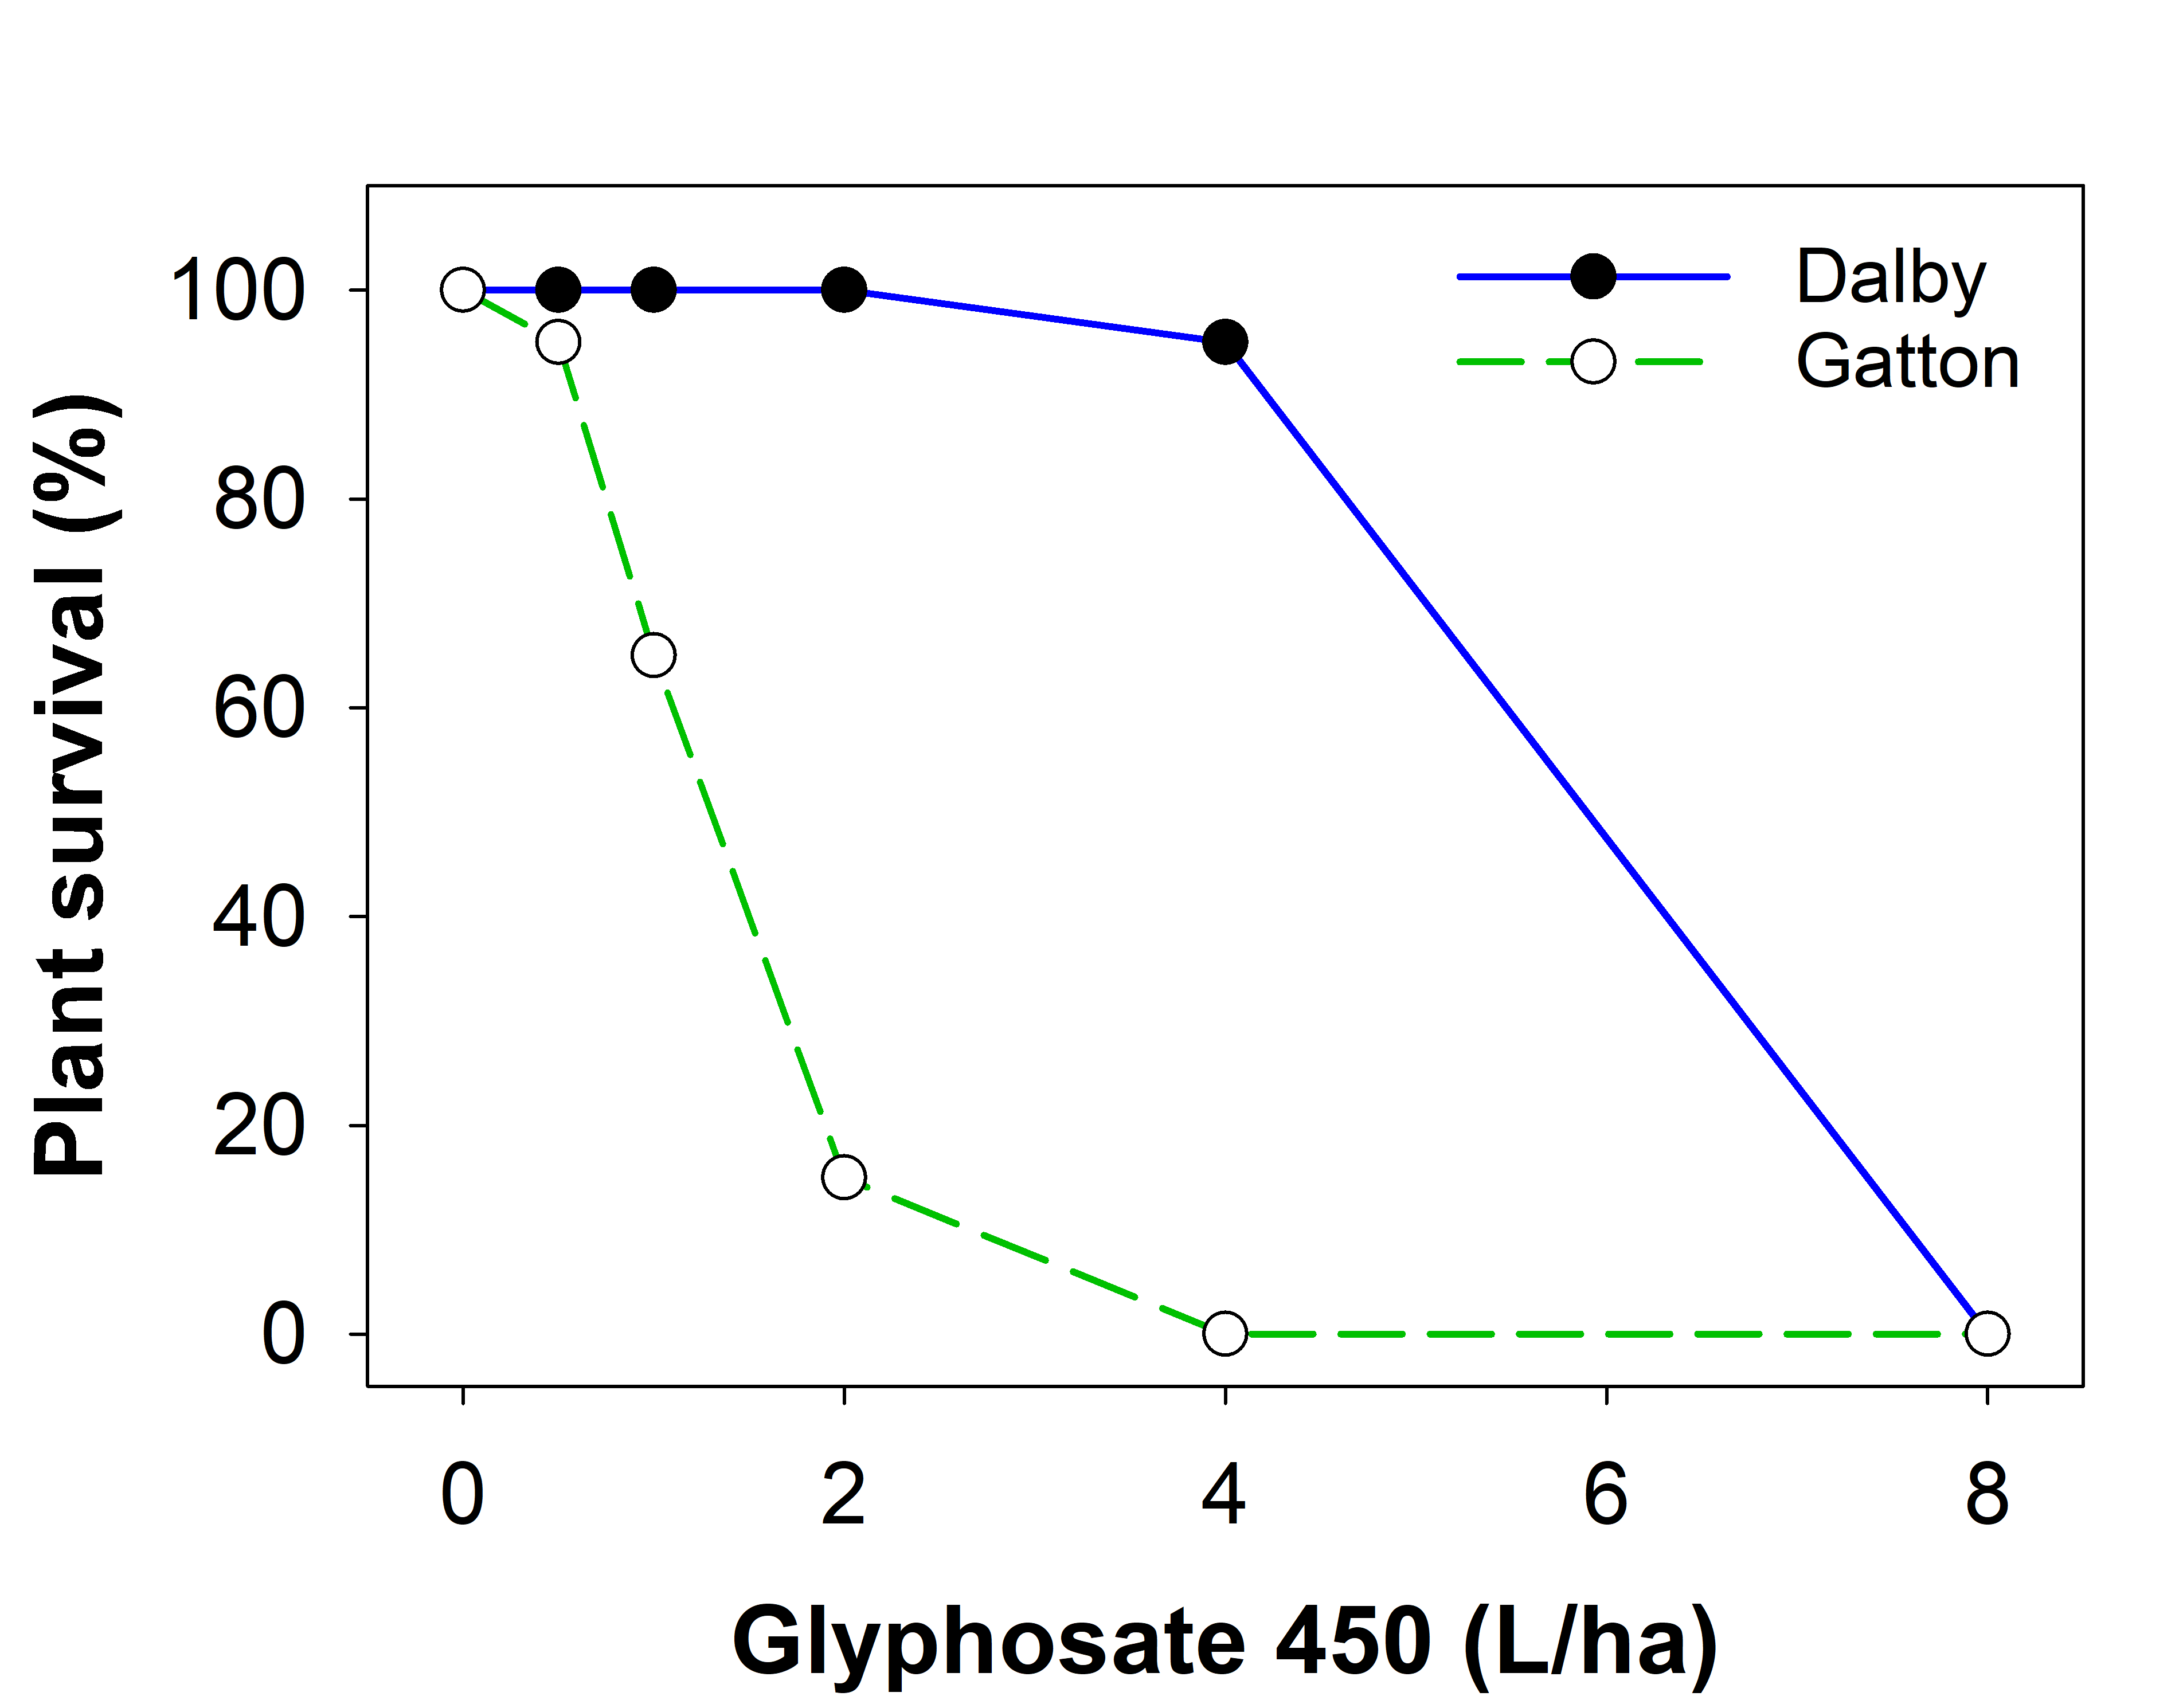 This line graph shows the effect of glyphosate (450 g ai/L) (L/ha) dose on plant survival (% of the non-treated control treatment) of the Dalby and Gatton populations of tall fleabane 